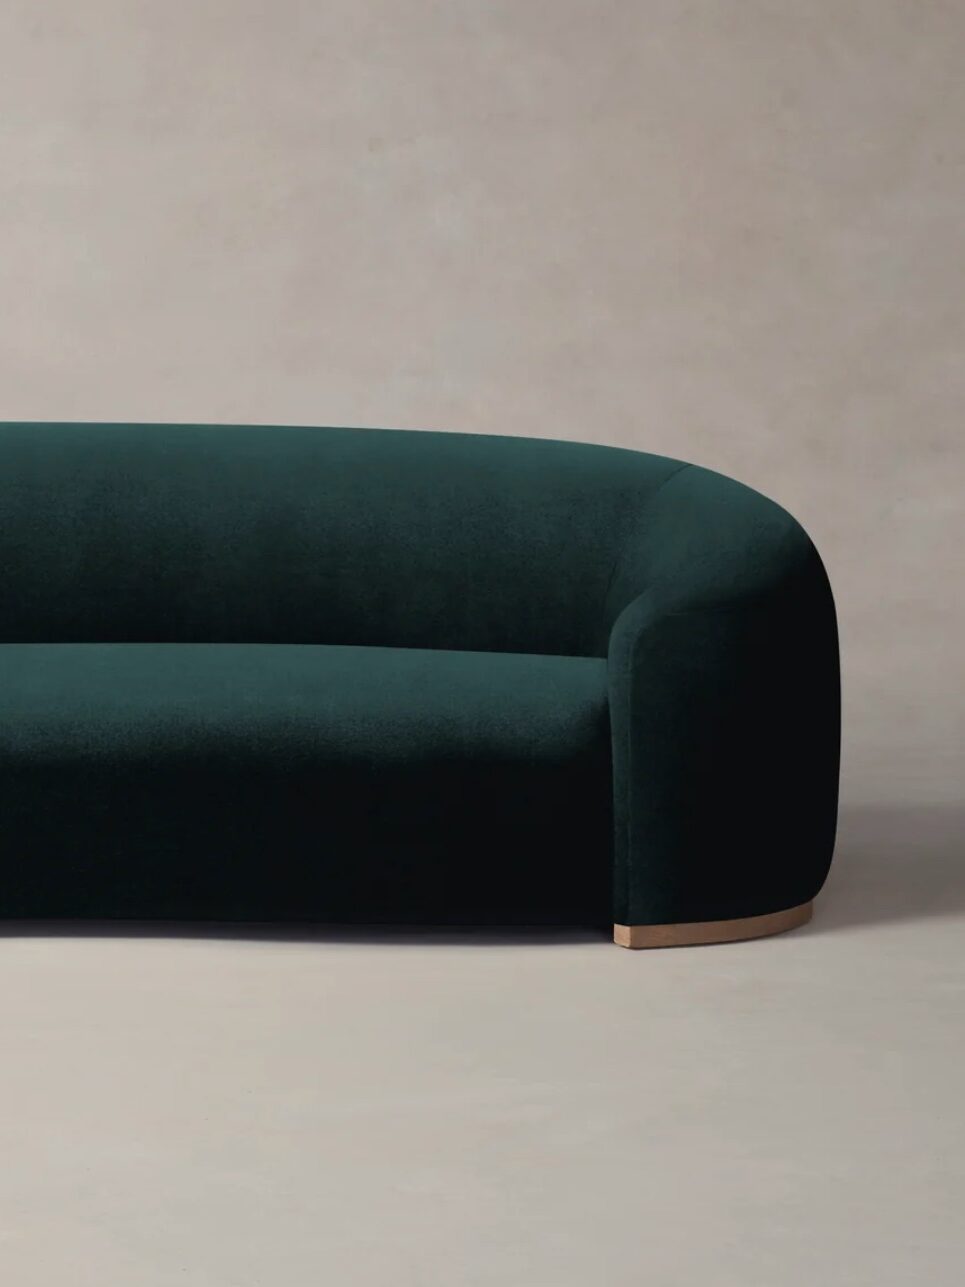 A sustainable velvelt green sofa from Maiden Home